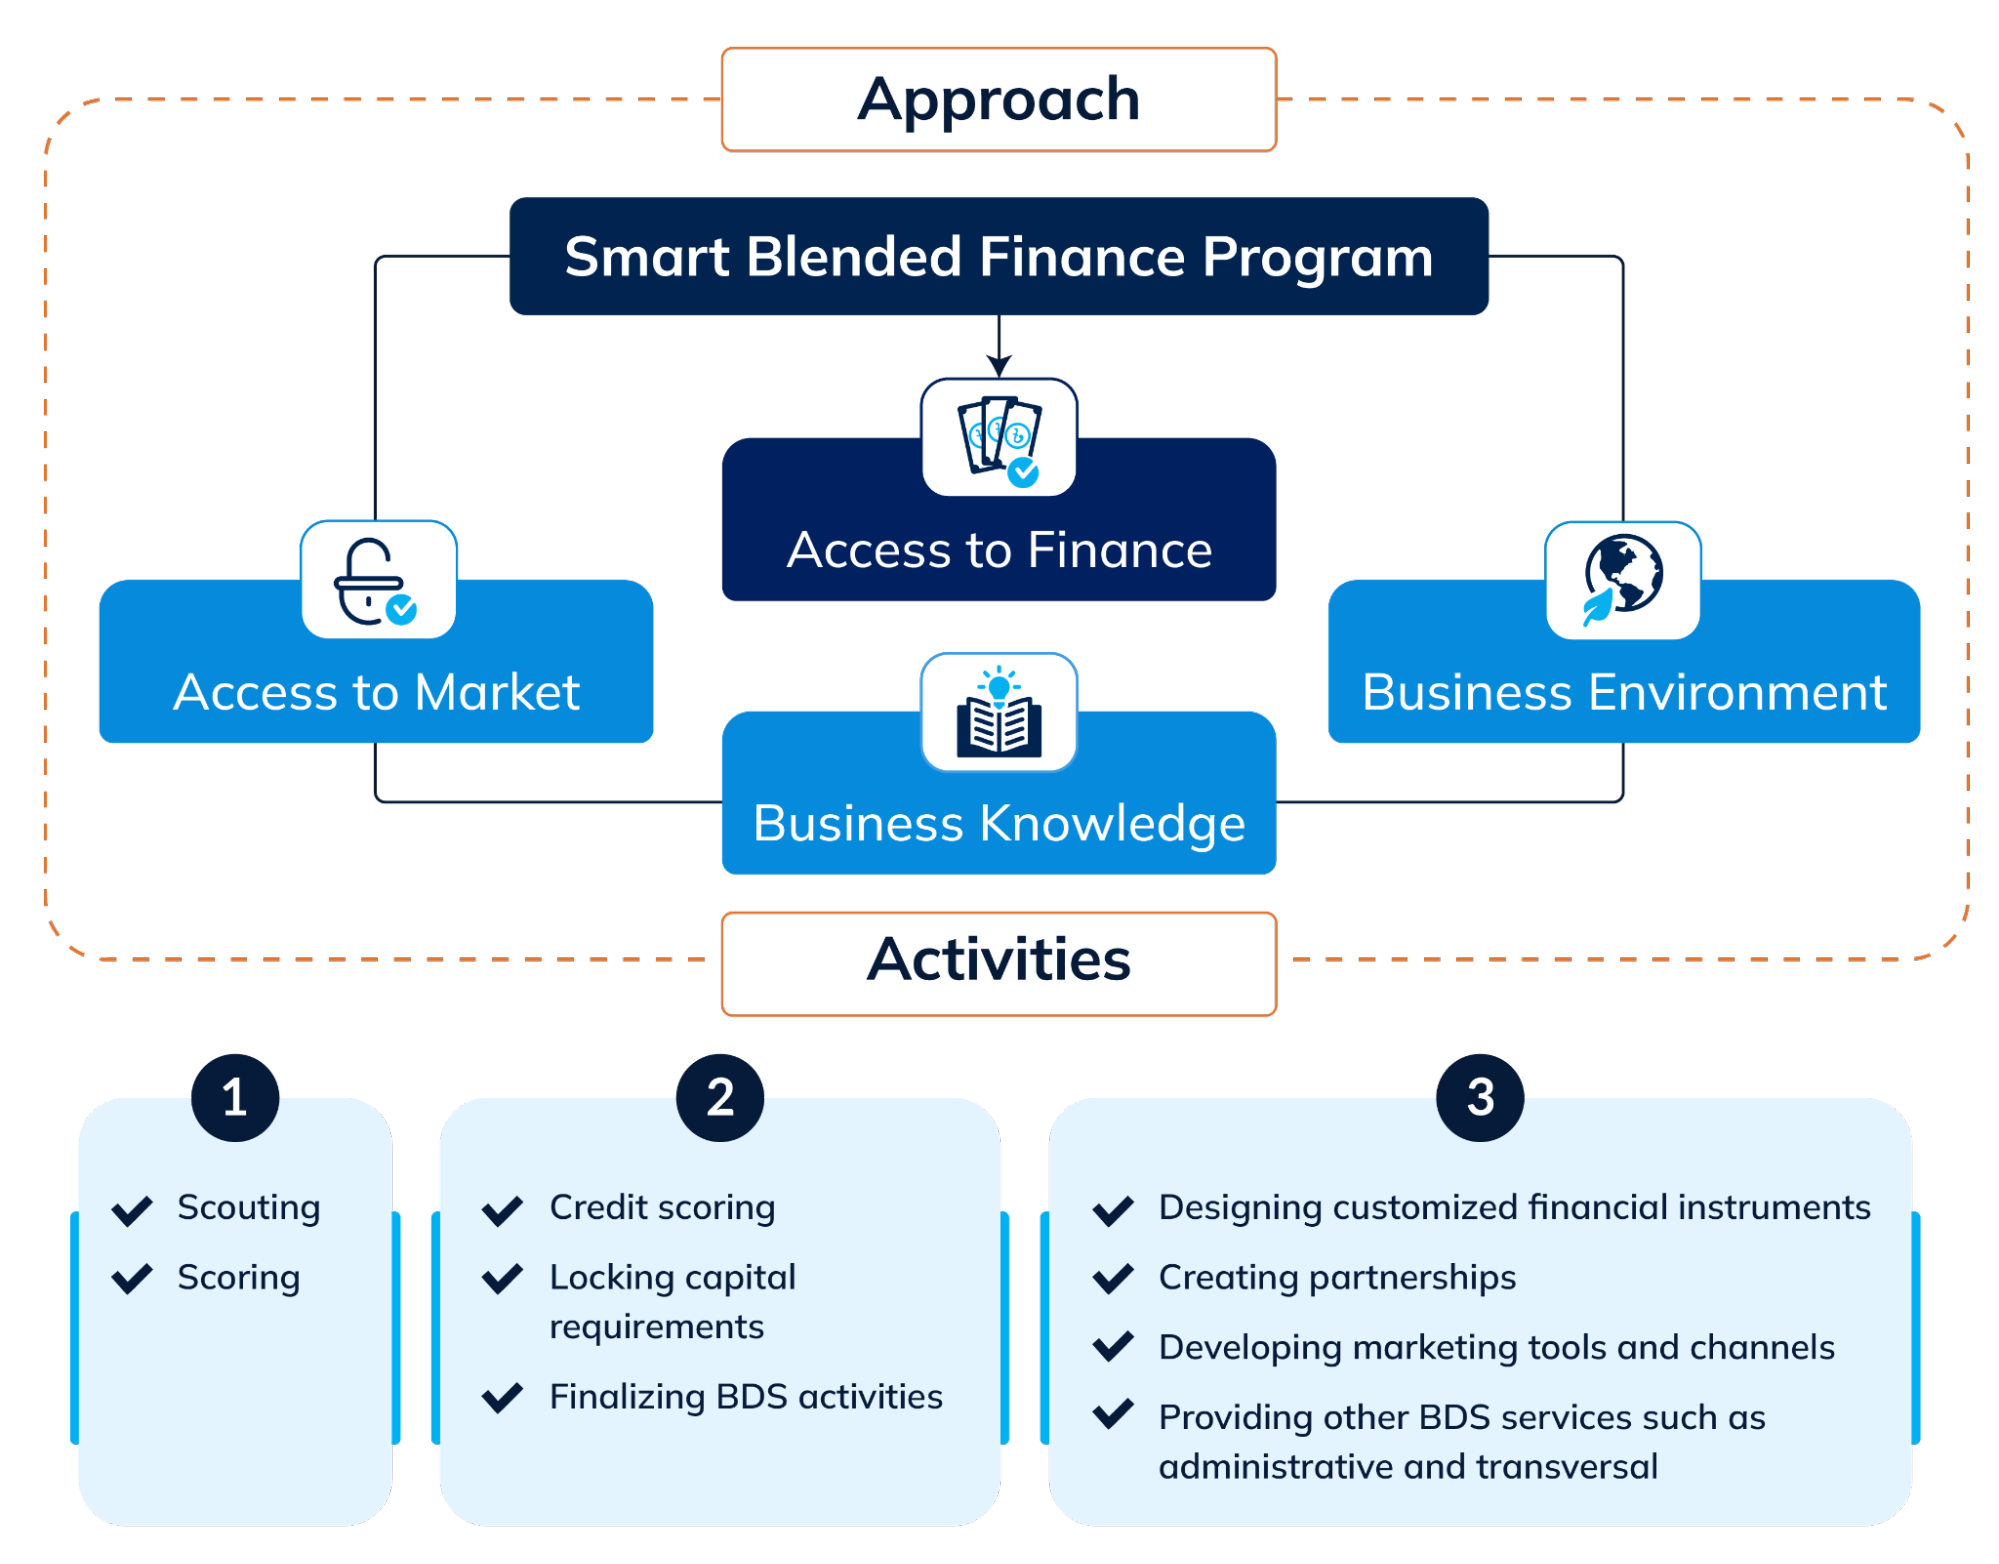 Our Approach to SMART Blended Finance Program